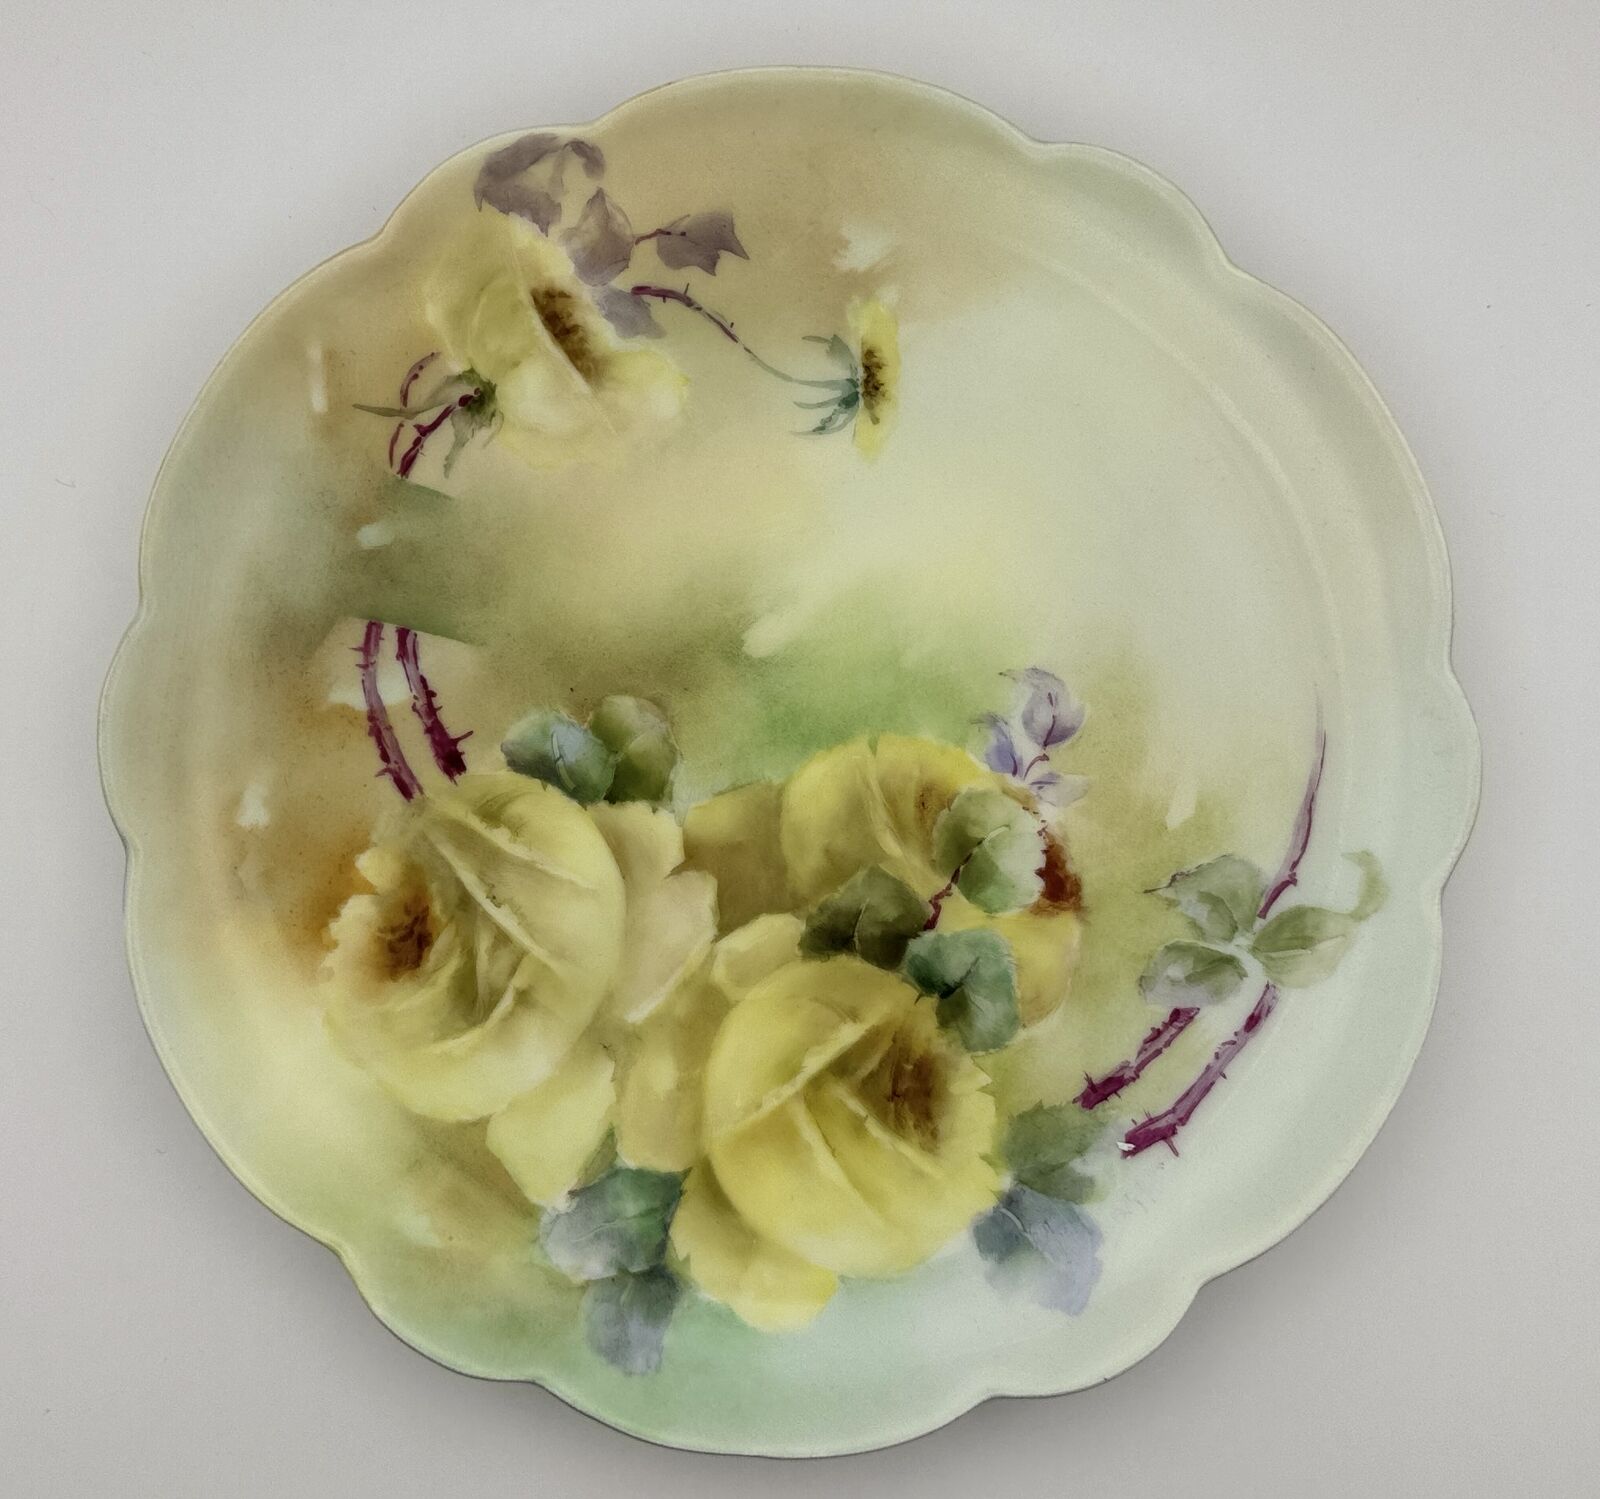 Rare Limoges Hand-Painted Floral Plate with Scalloped Edge